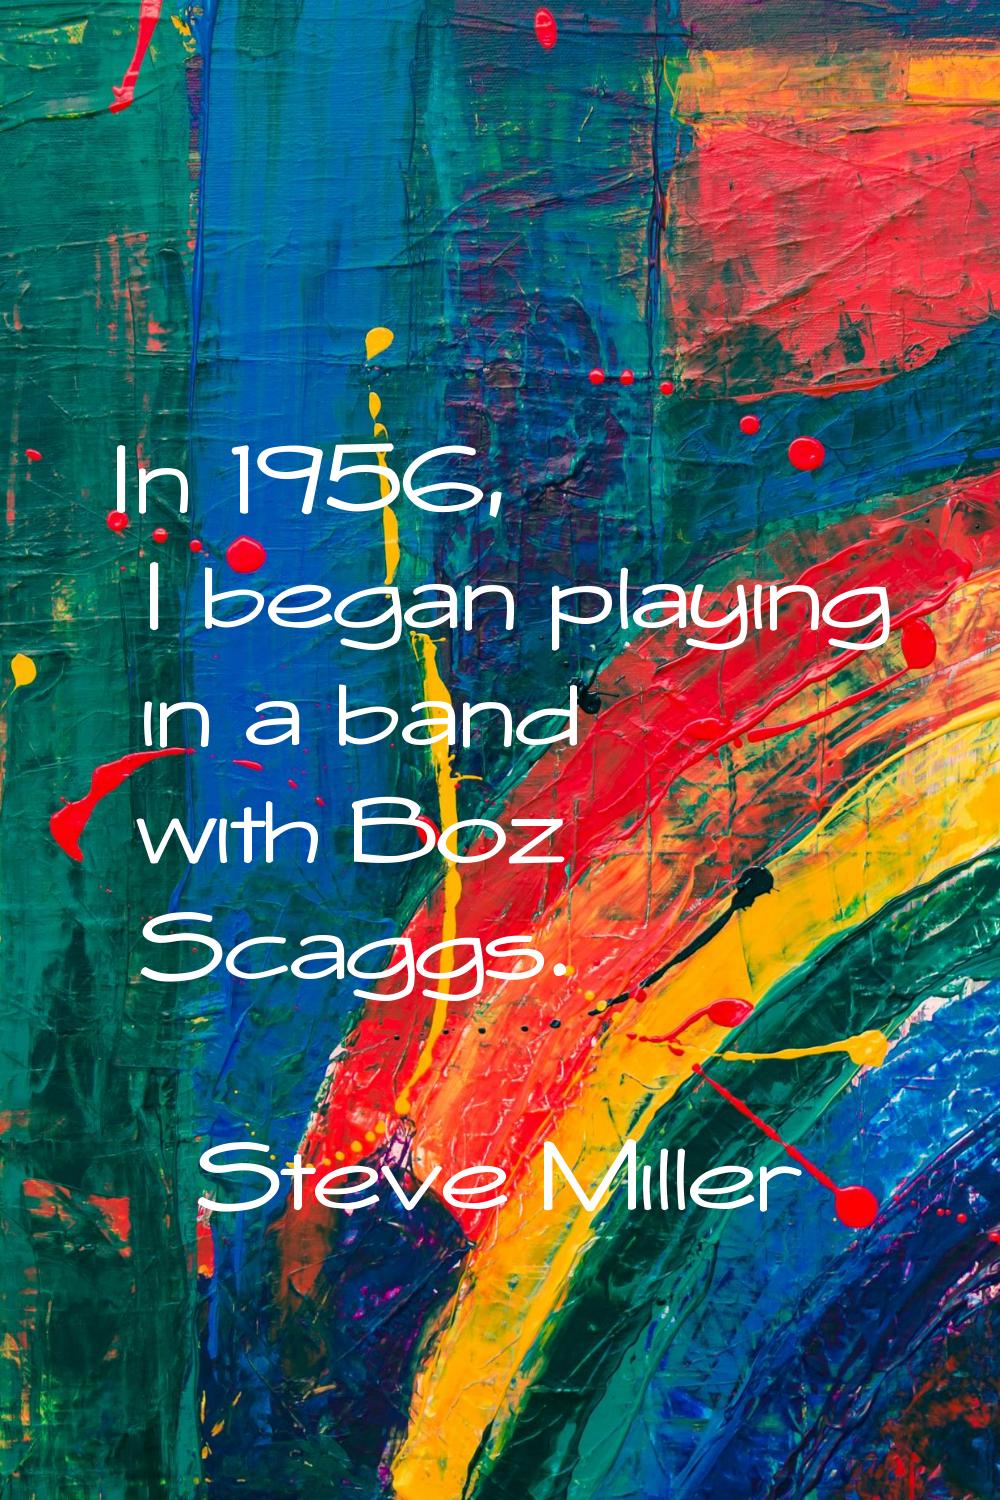 In 1956, I began playing in a band with Boz Scaggs.